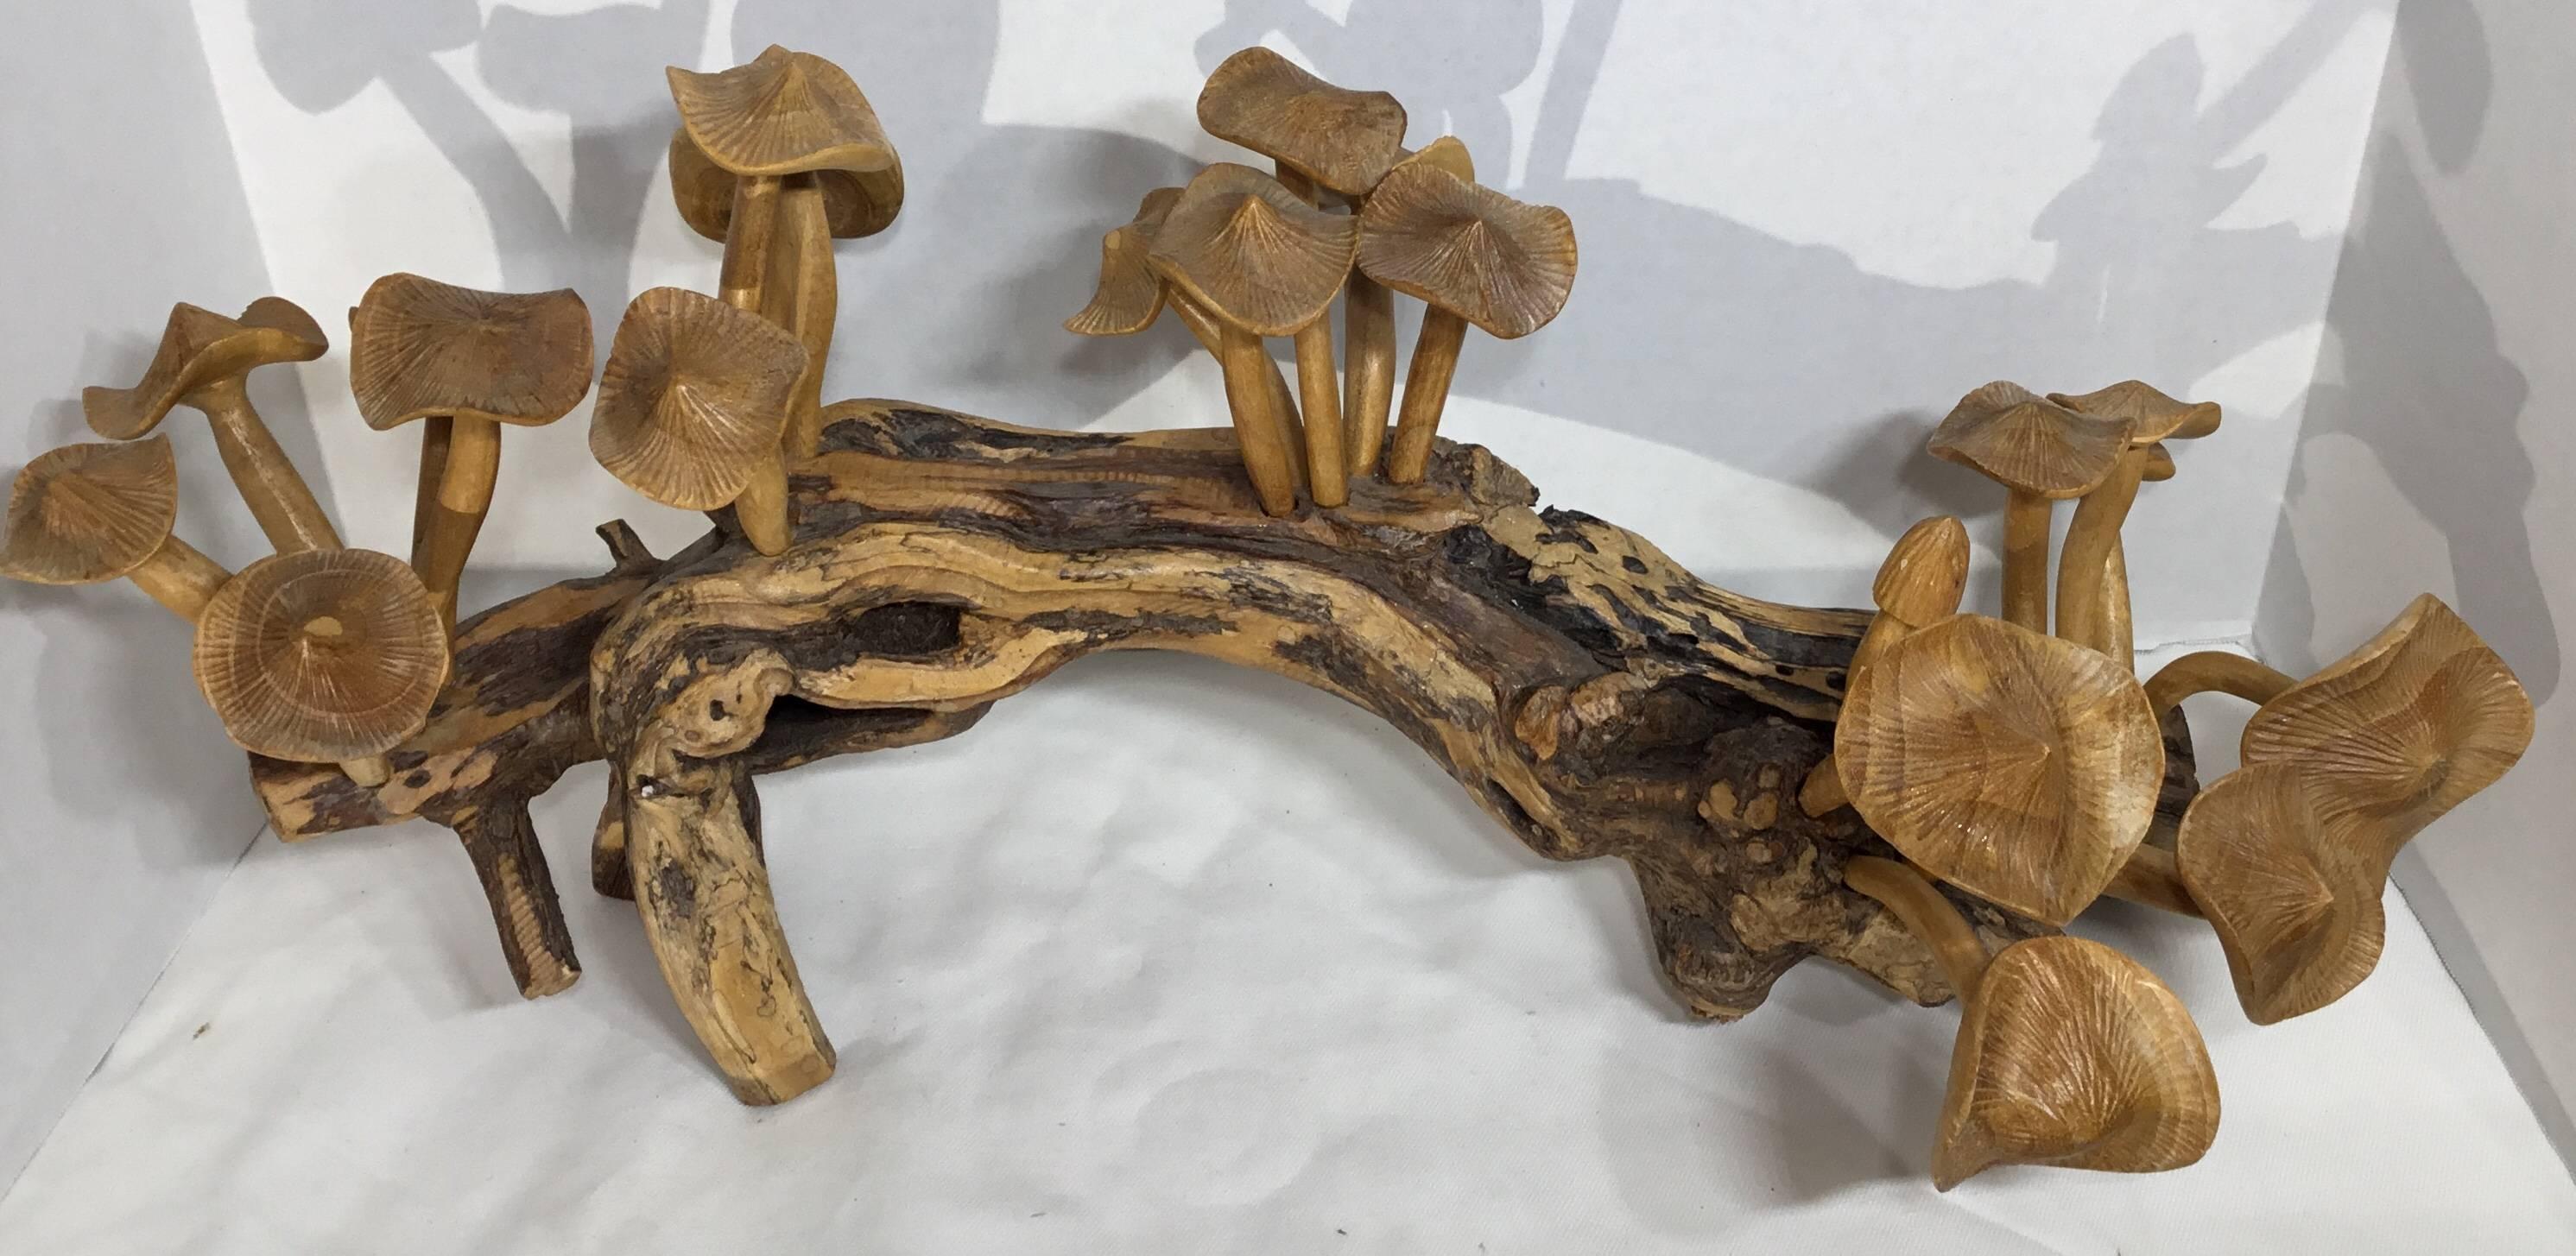 One of a kind set of hand-carved teak wood mushrooms, artistically mounted on a Elegant wood
Stem of a tree. Can be display from all sides and could even rotate some of the mushrooms.
Great display of object of art.